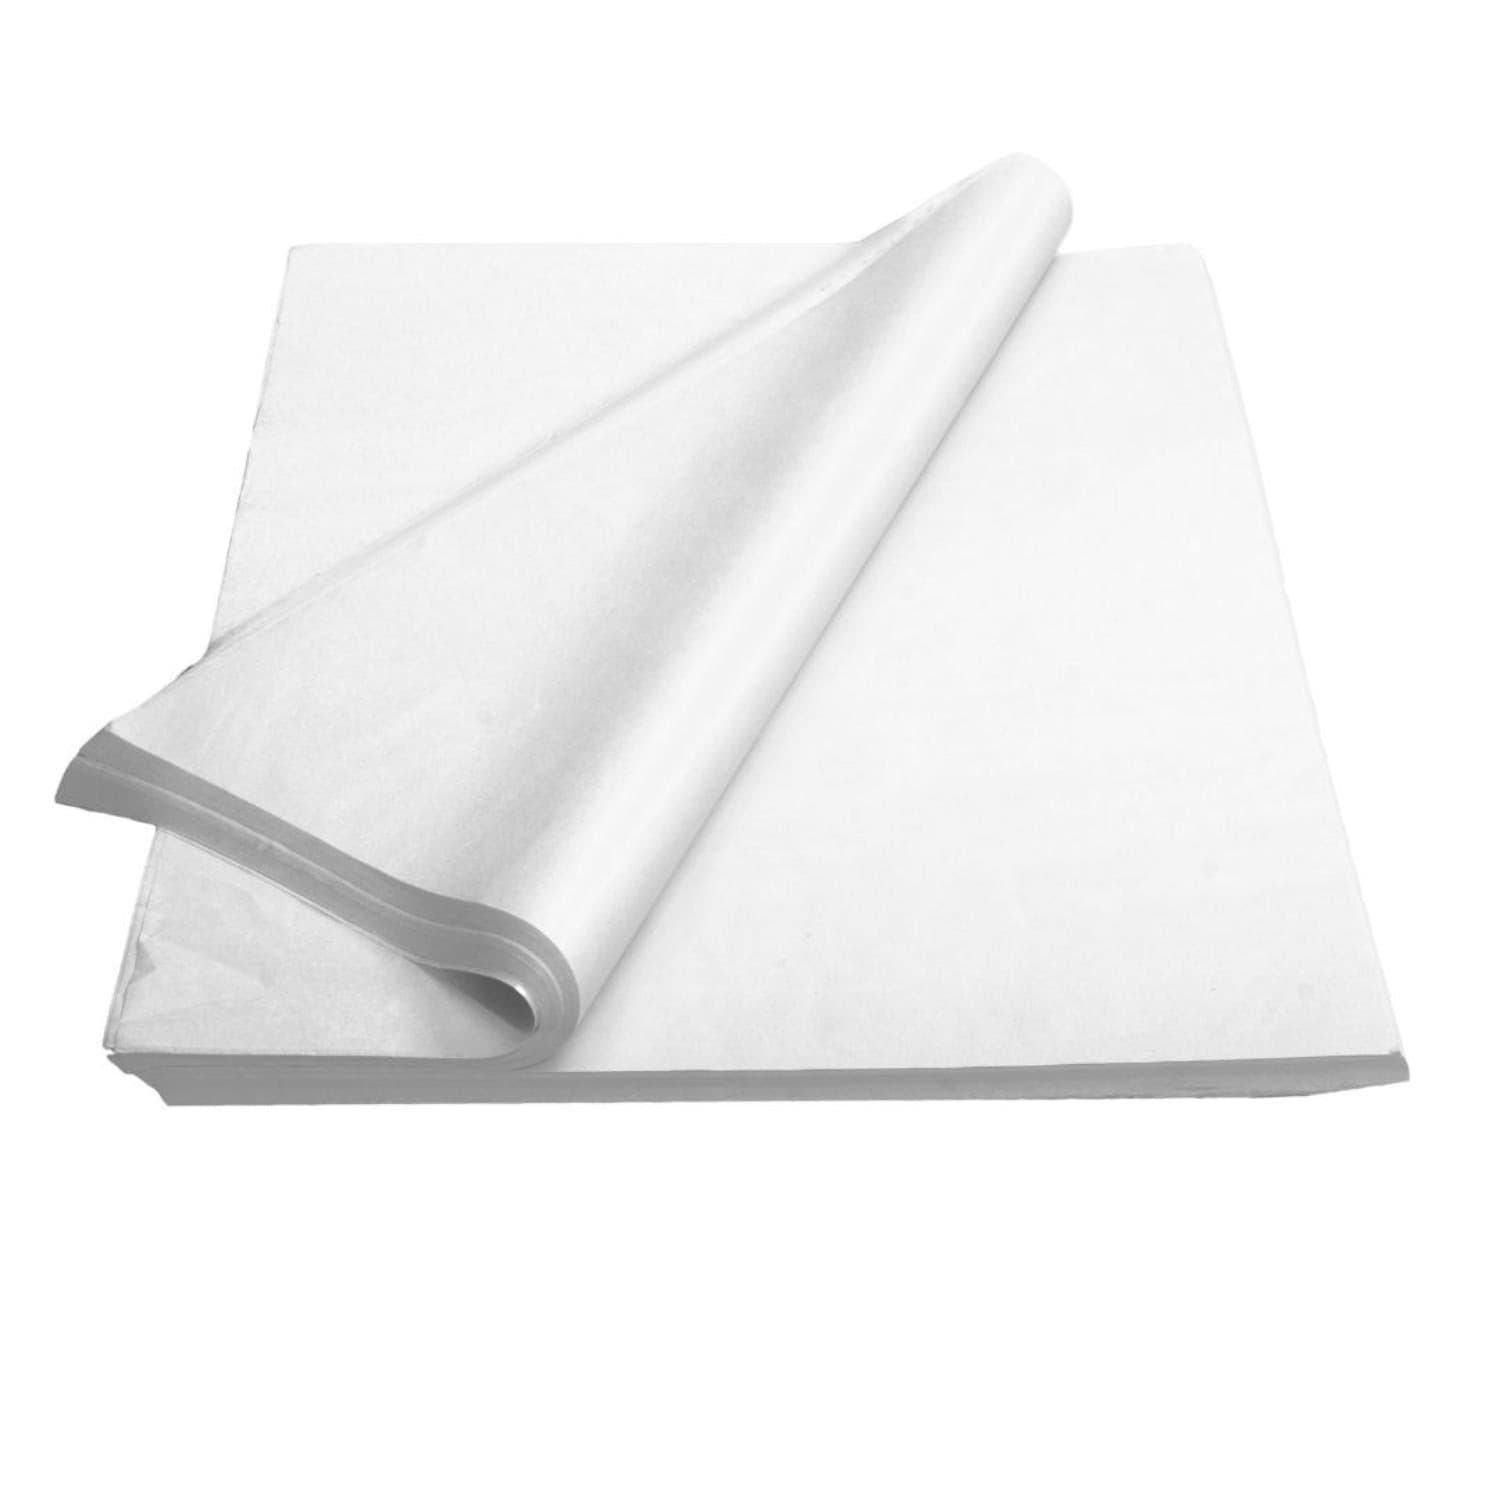 Assortment Pack Tissue Paper Sheets - 20 x 30, Black and White - ULINE - Bundle of 240 Sheets - S-21191